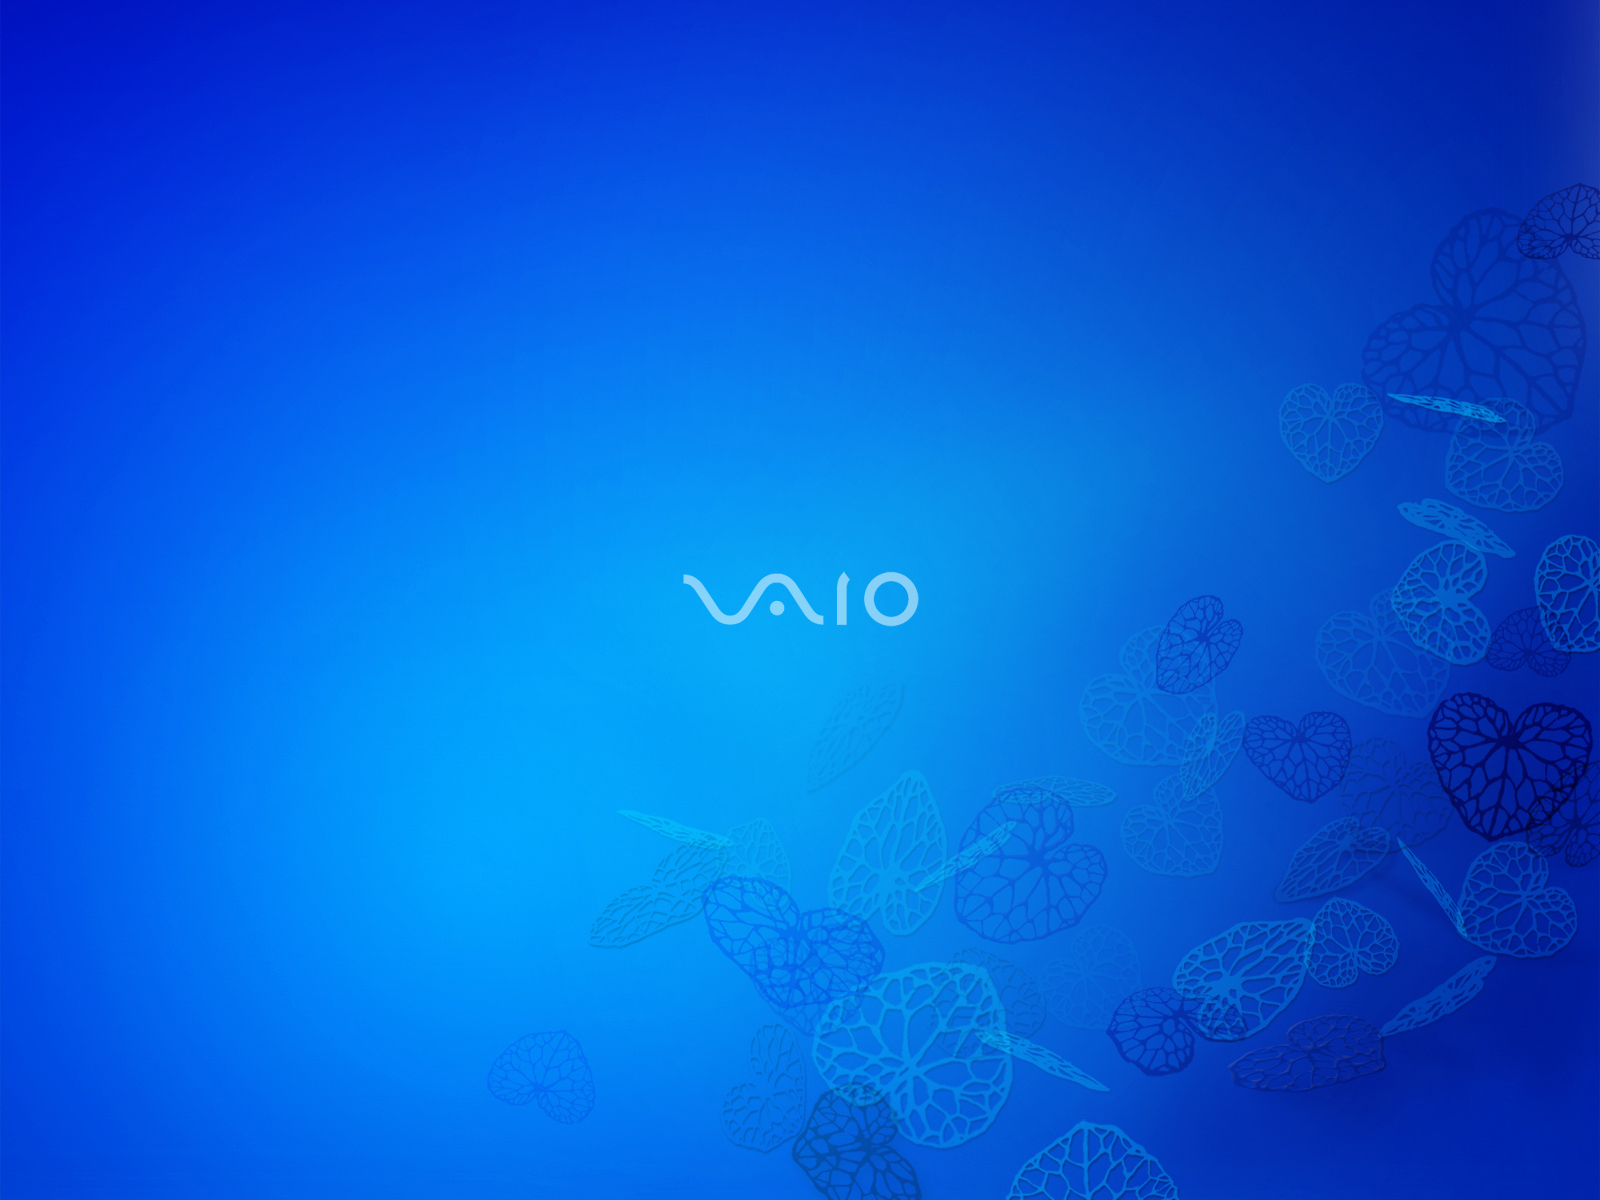 Sony VAIO Wallpapers | Wallpapers HD